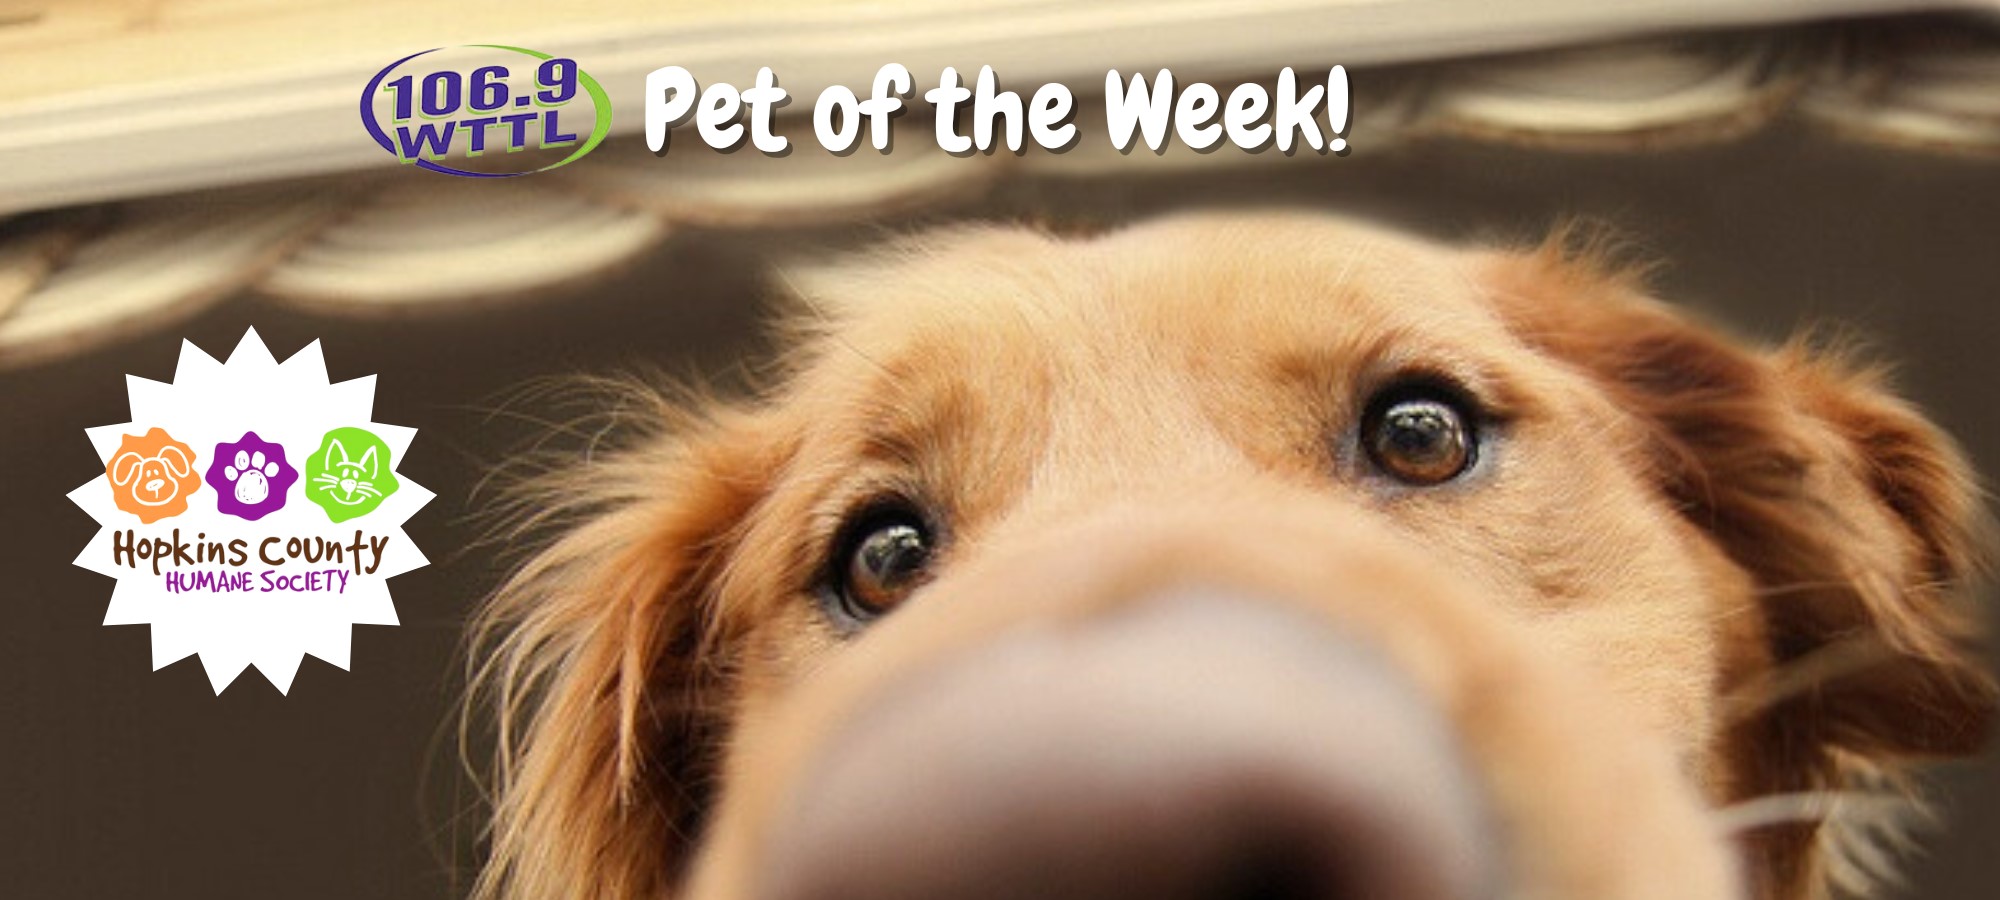 Hopkins County Humane Society’s Pet of the Week Monday, July 22